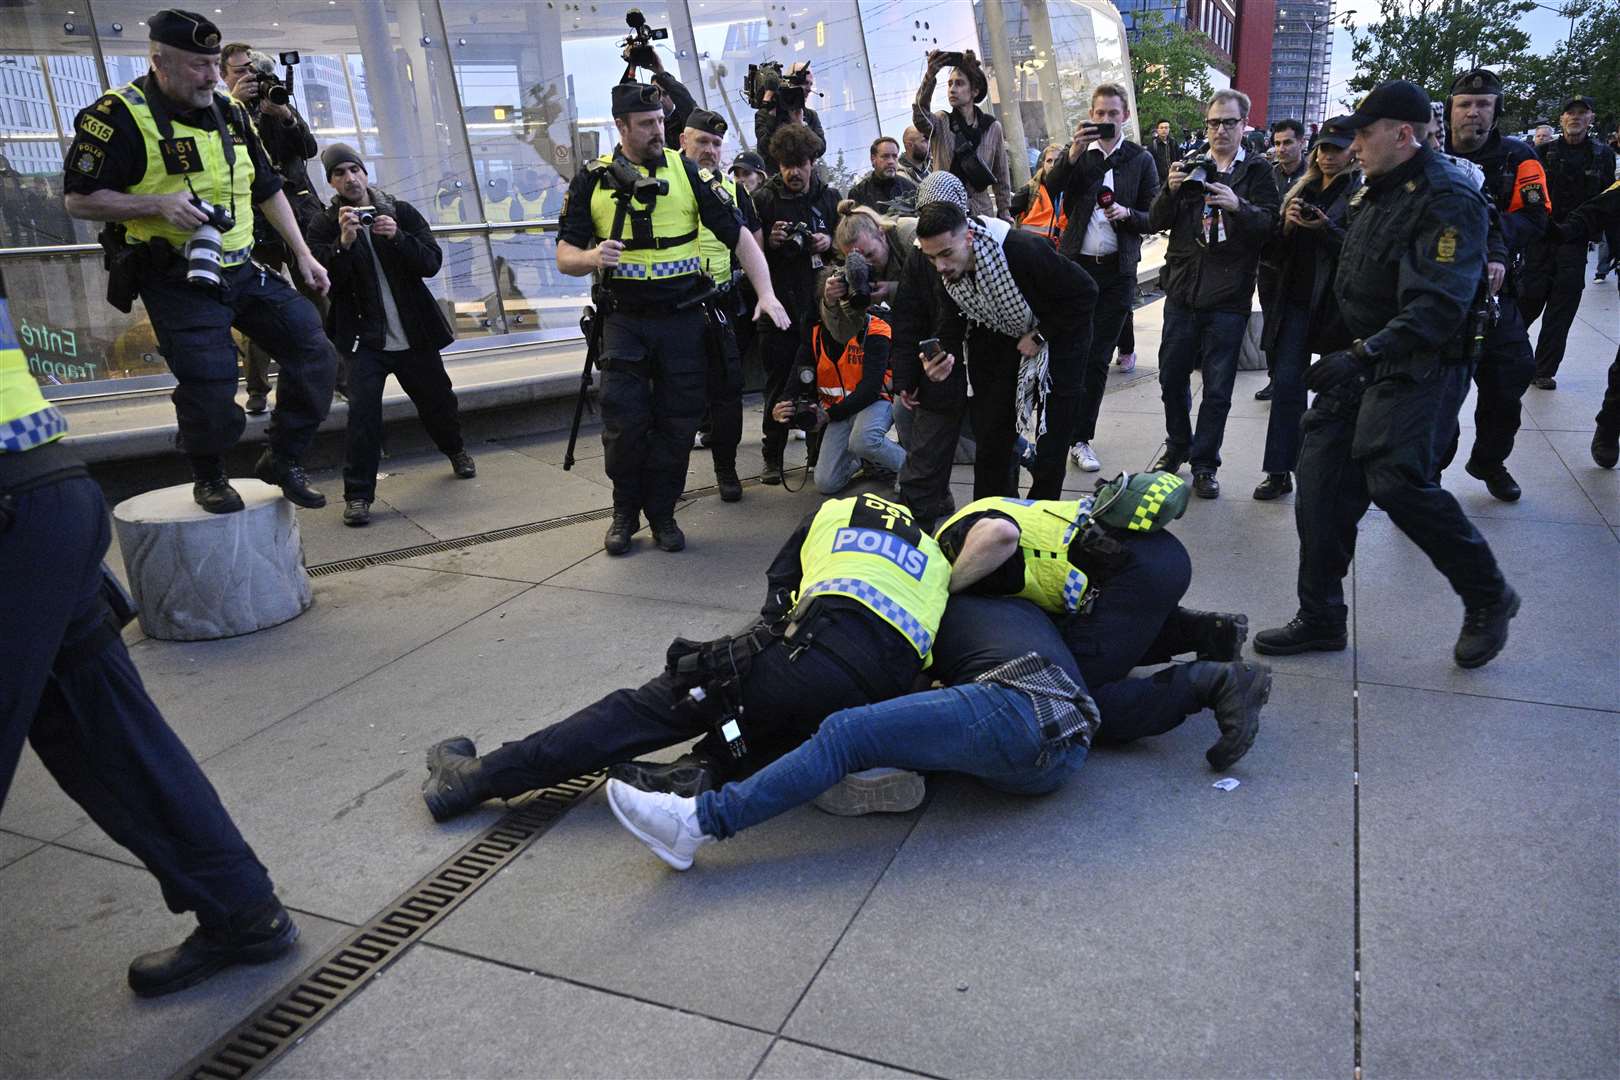 Police tackle a man during a protest against the participation of Israeli contestant Eden Golan ahead of the final of the Eurovision Song Contest in Malmo, Sweden (Johan Nilsson/TT News Agency via AP)